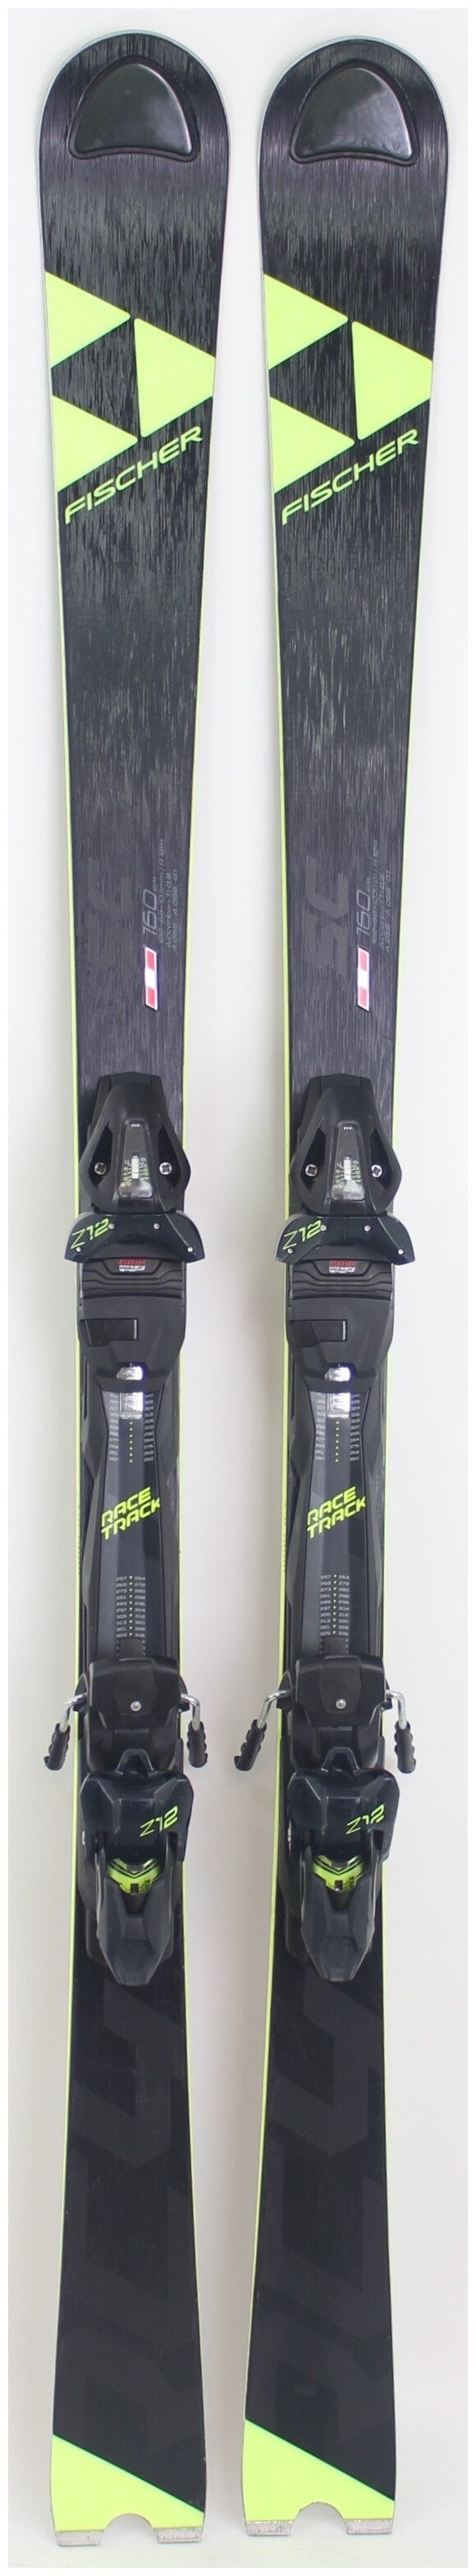 2020 Fischer RC4 Worldcup SC 160cm Used Demo Skis on Sale - Powder7